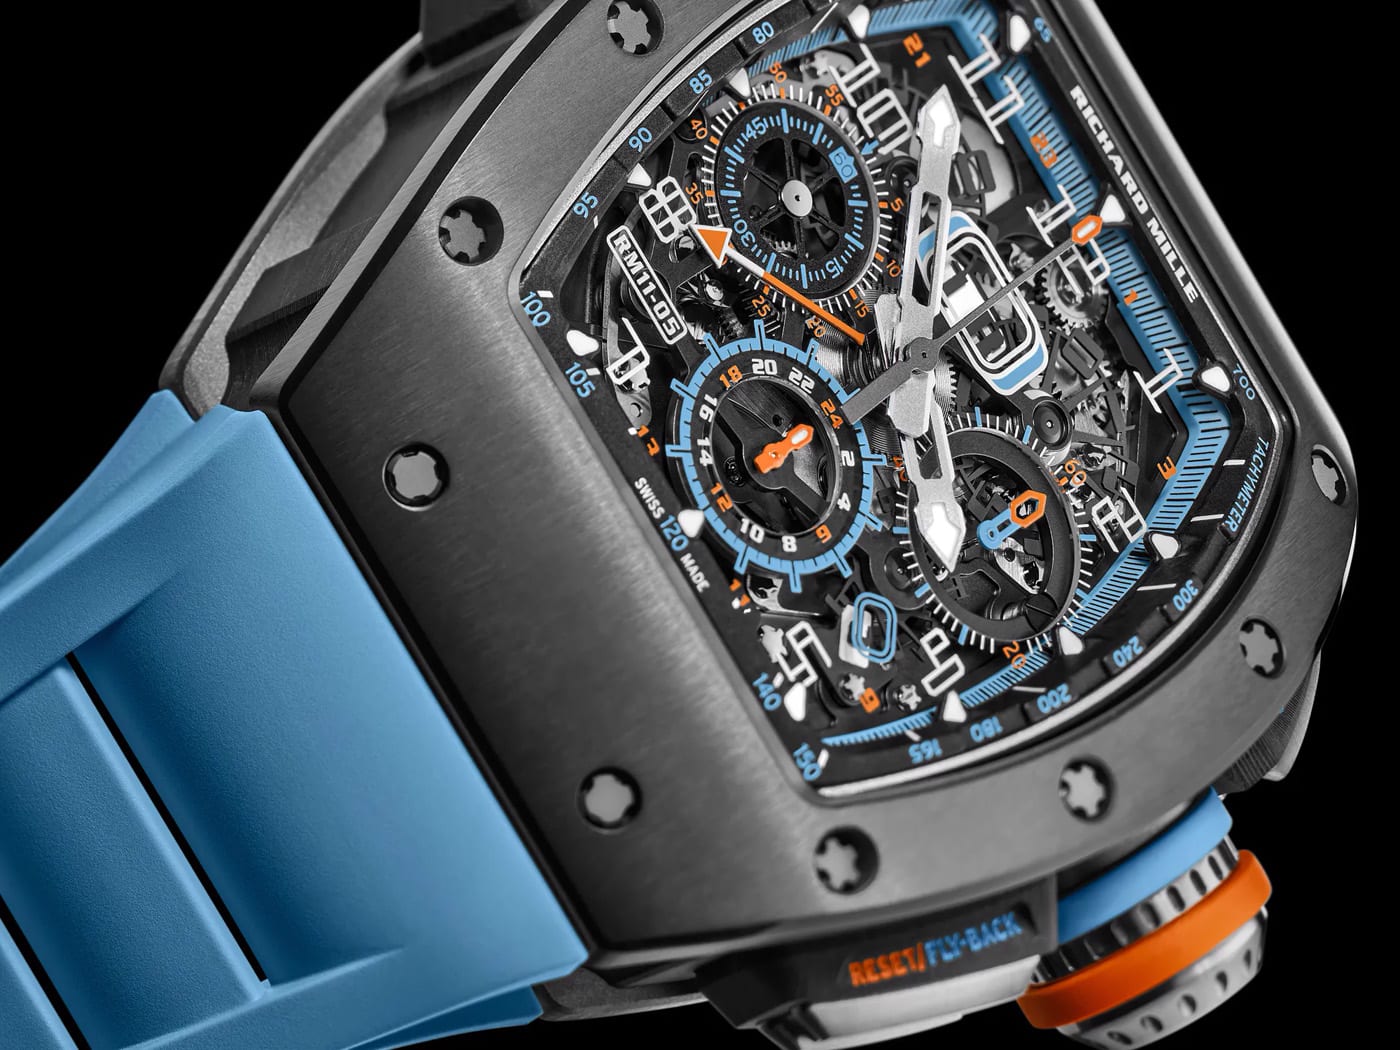 Richard Mille Debuts Watch With A Brand New Material Called Cermet